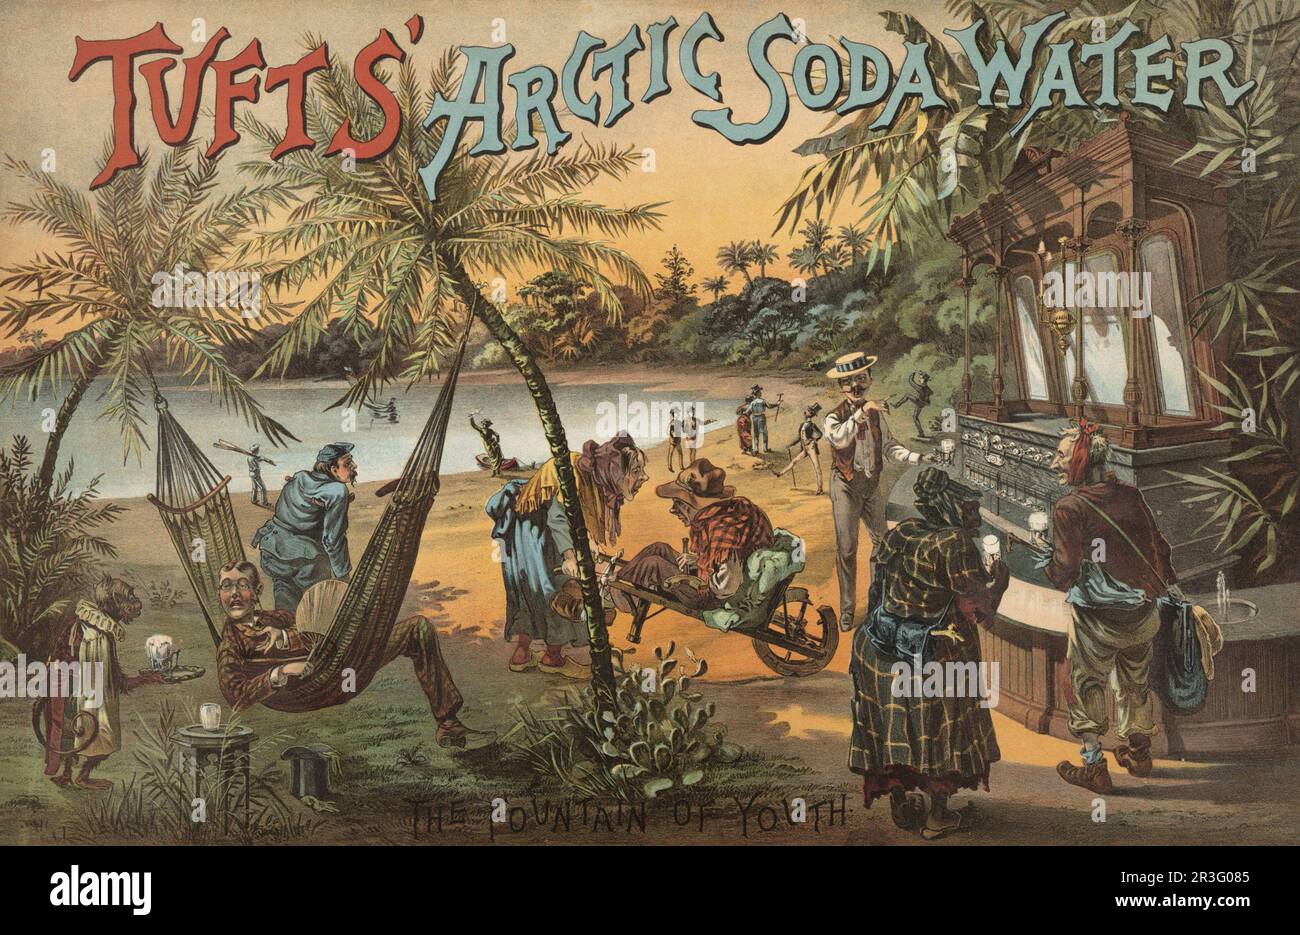 Vintage advertisement for Tuft's Arctic Soda Water, the Fountain of Youth. Stock Photo